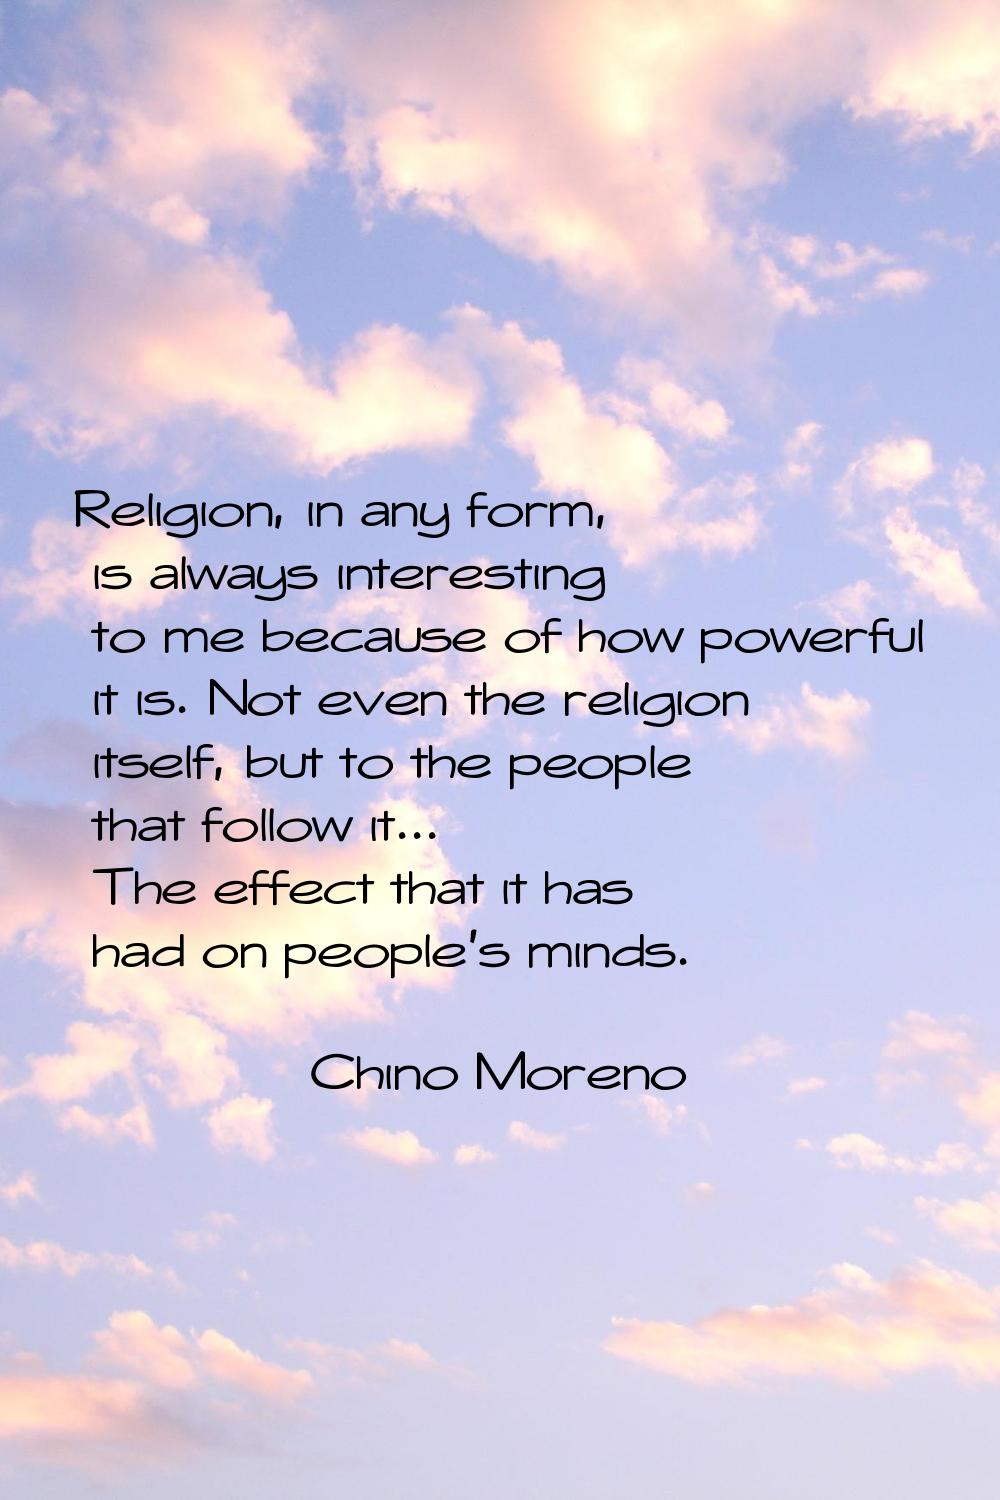 Religion, in any form, is always interesting to me because of how powerful it is. Not even the reli